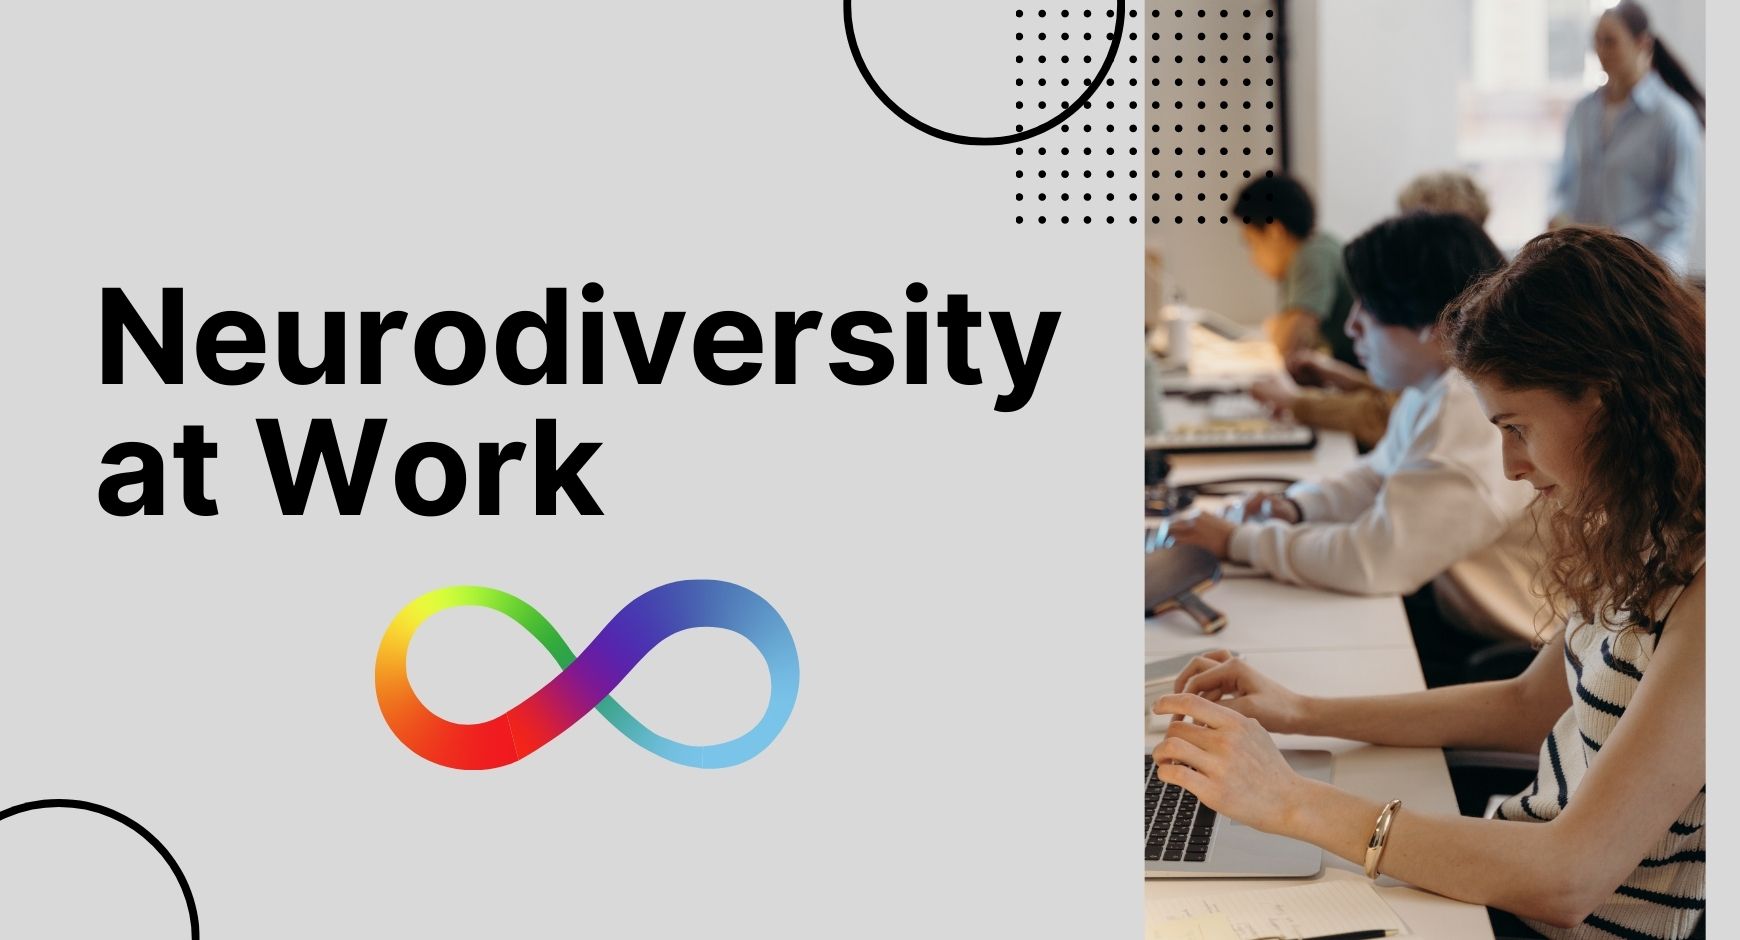 A picture of people working on laptops next to words that read "Neurodiversity at Work" and a rainbow infinity sign. 